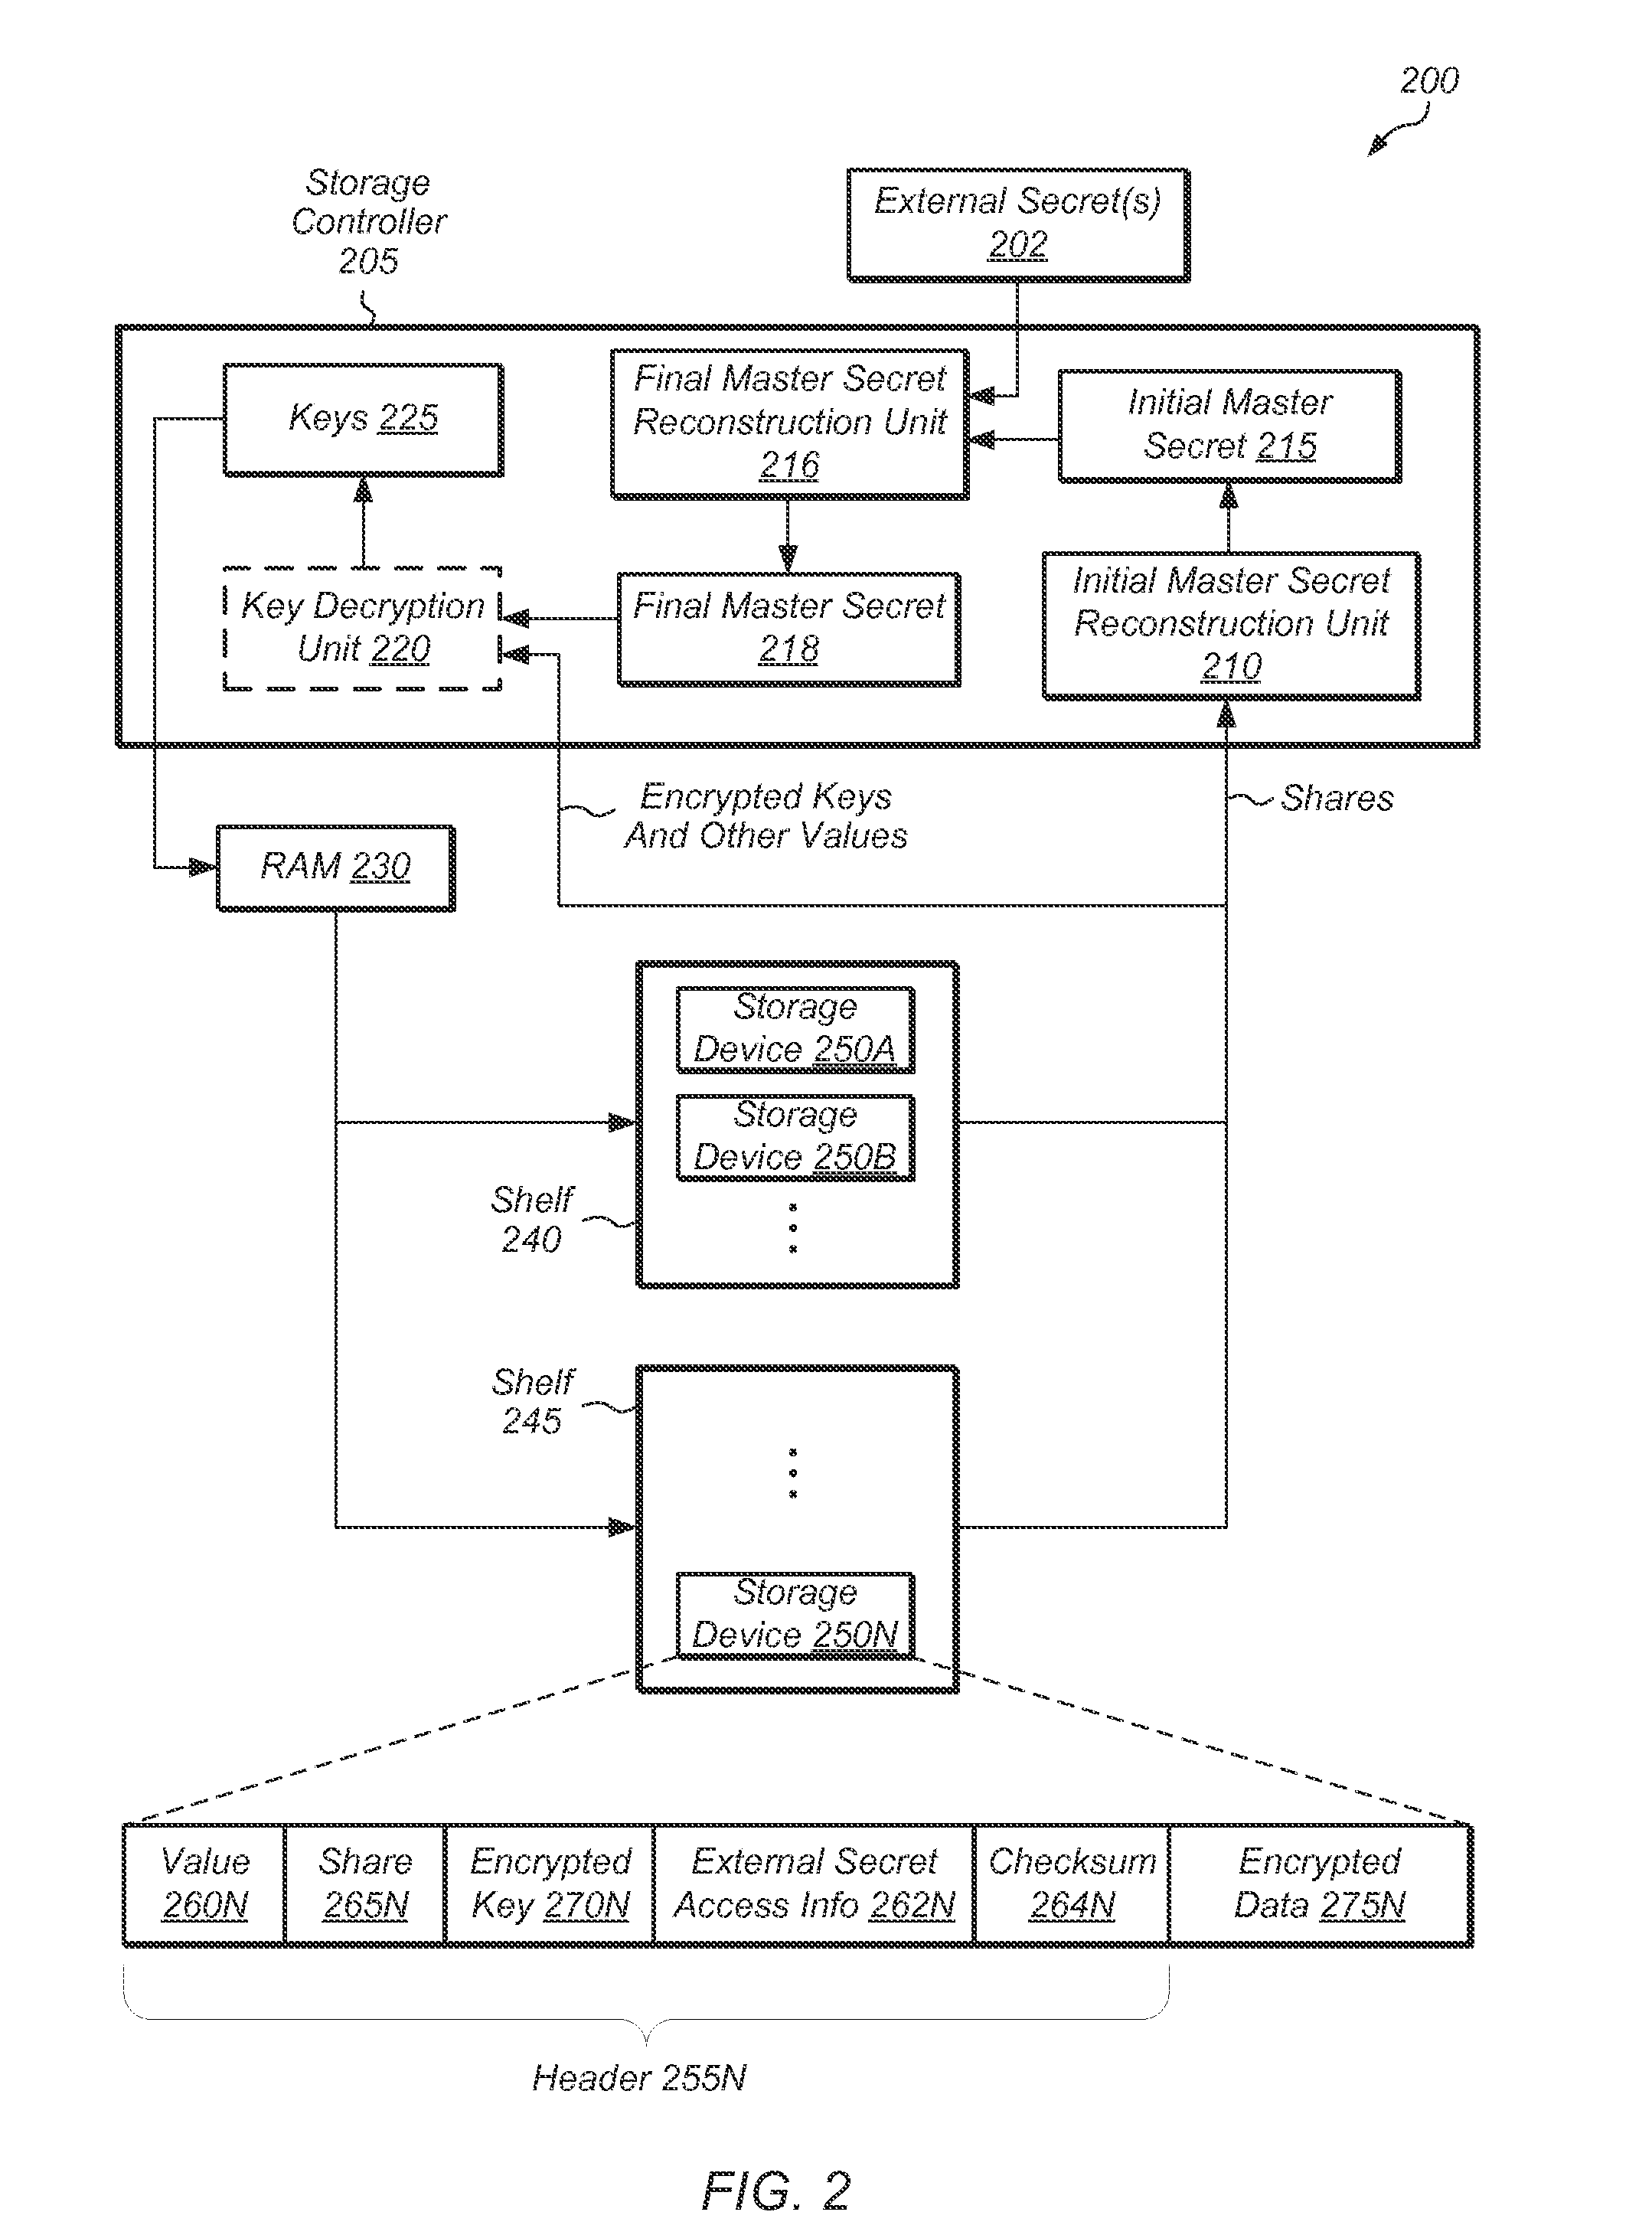 Data protection in a storage system using external secrets